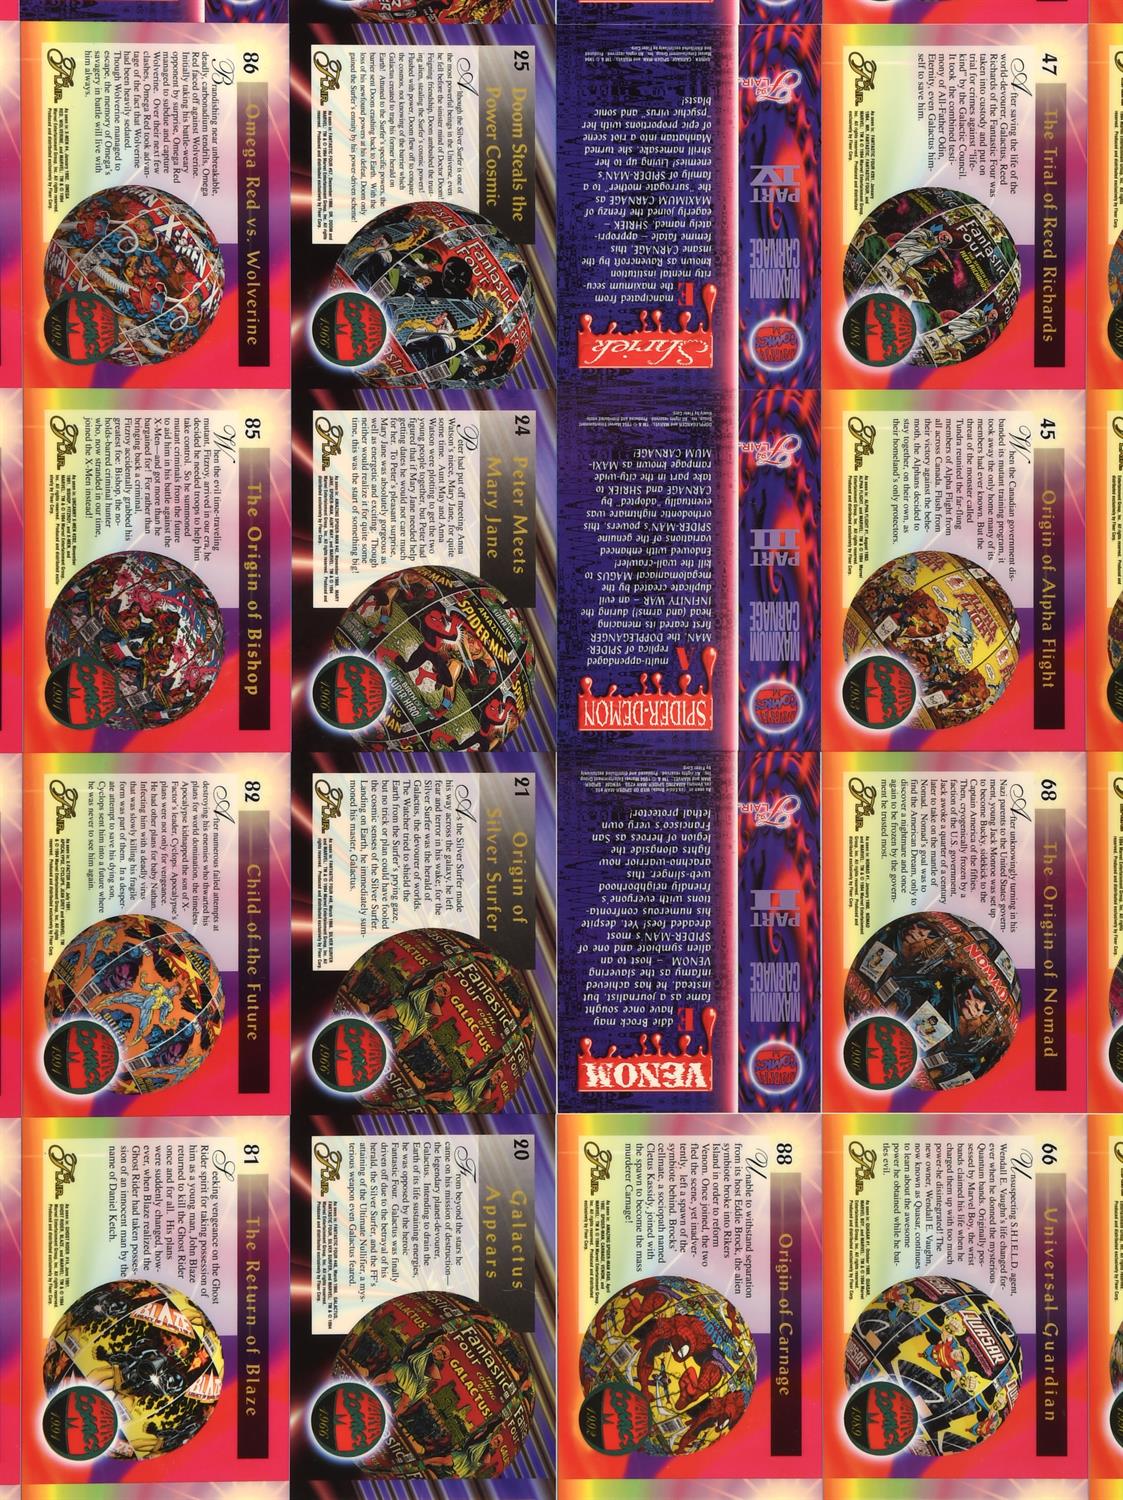 1994 Marvel Flair Uncut Sheet. Double sided printing with both the front and back of the cards. - Image 14 of 14